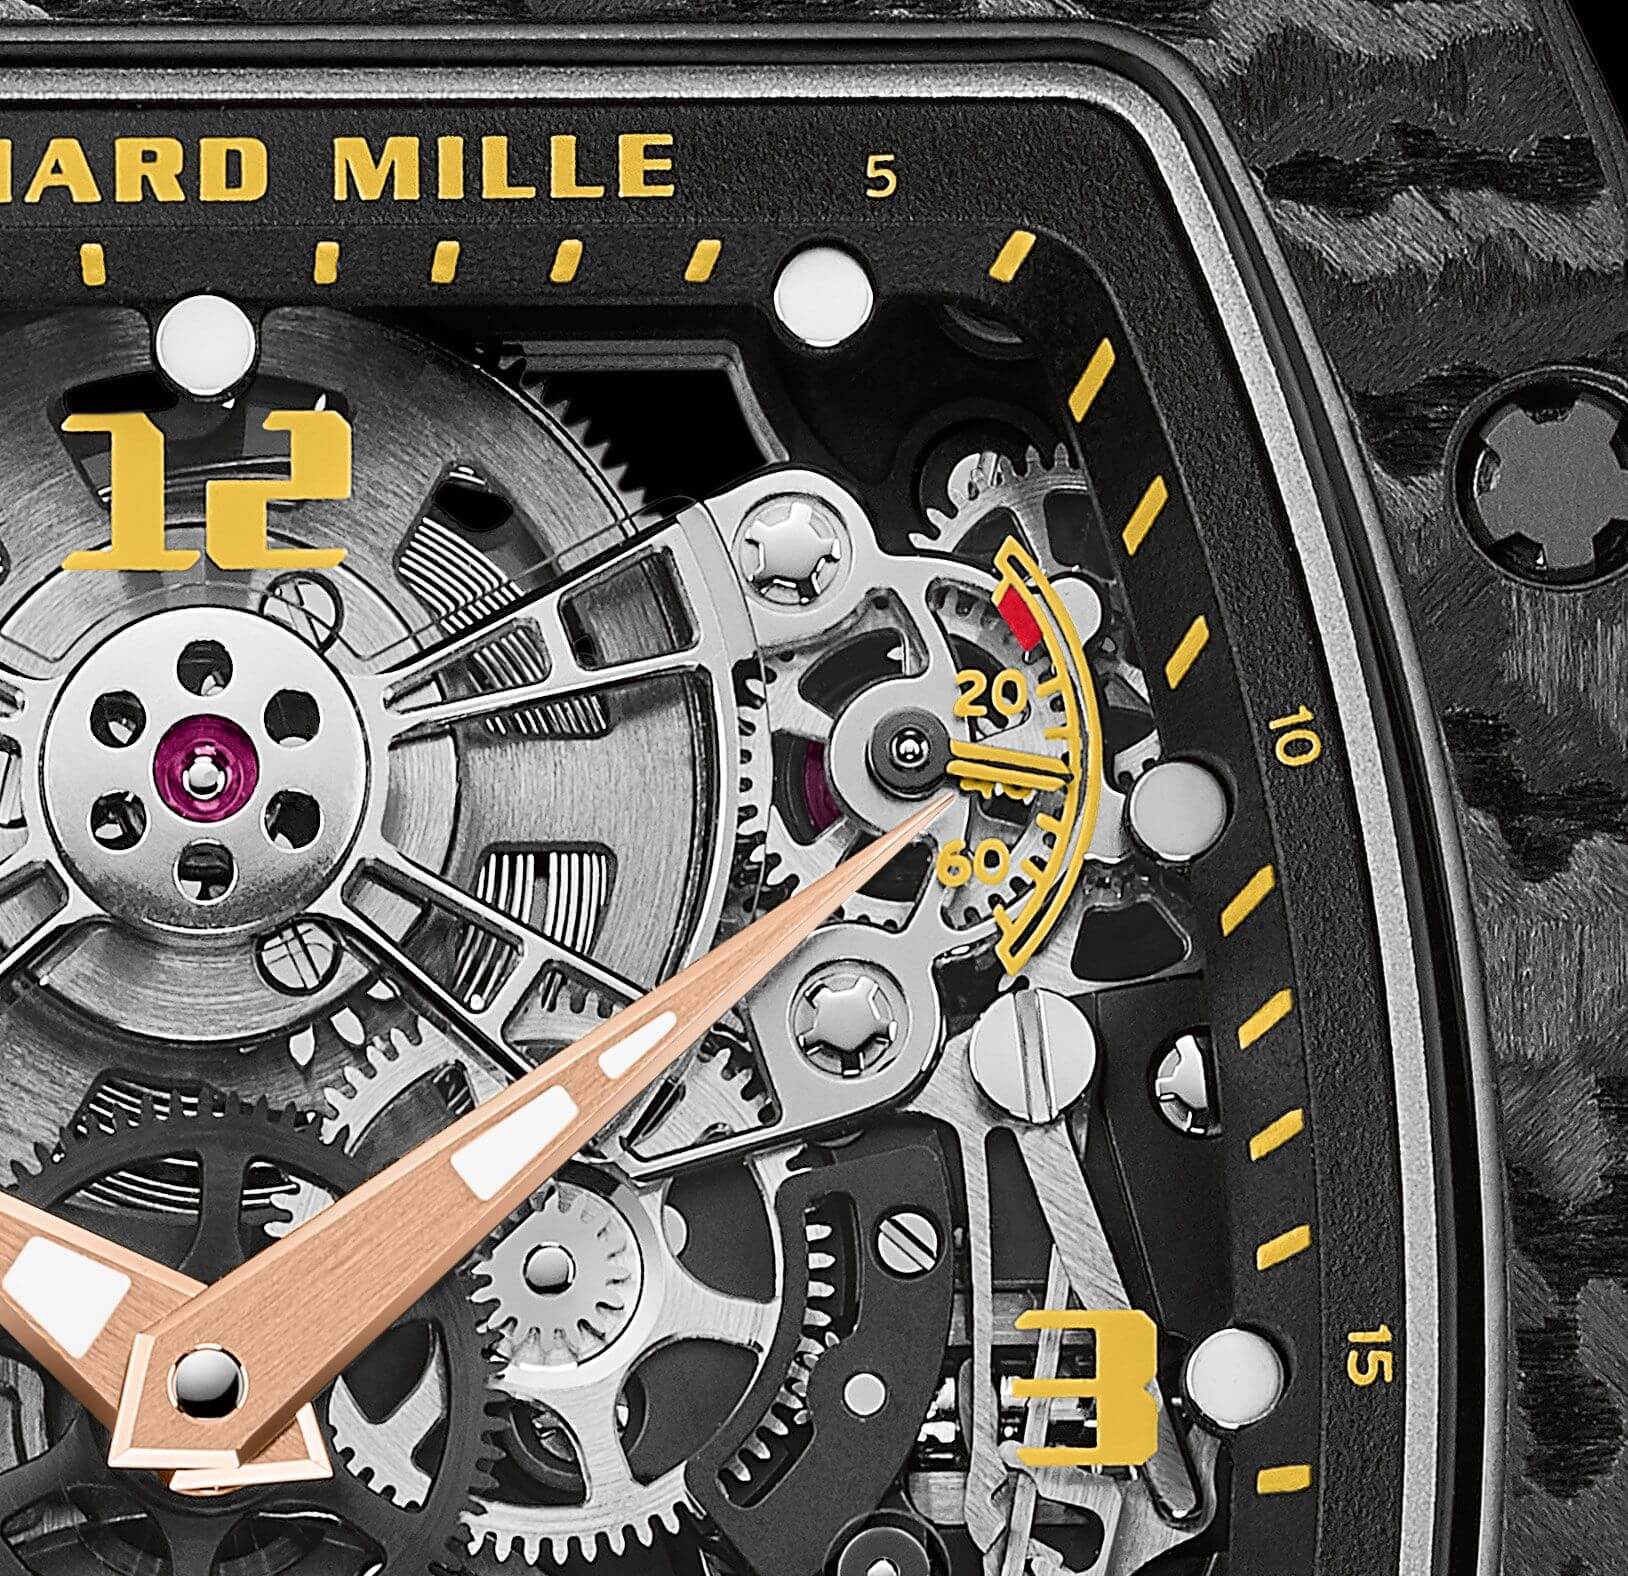 Richard Mille RM-032 Automatic Chronograph Diver, Skeleton Dial - Rose Gold on Strap